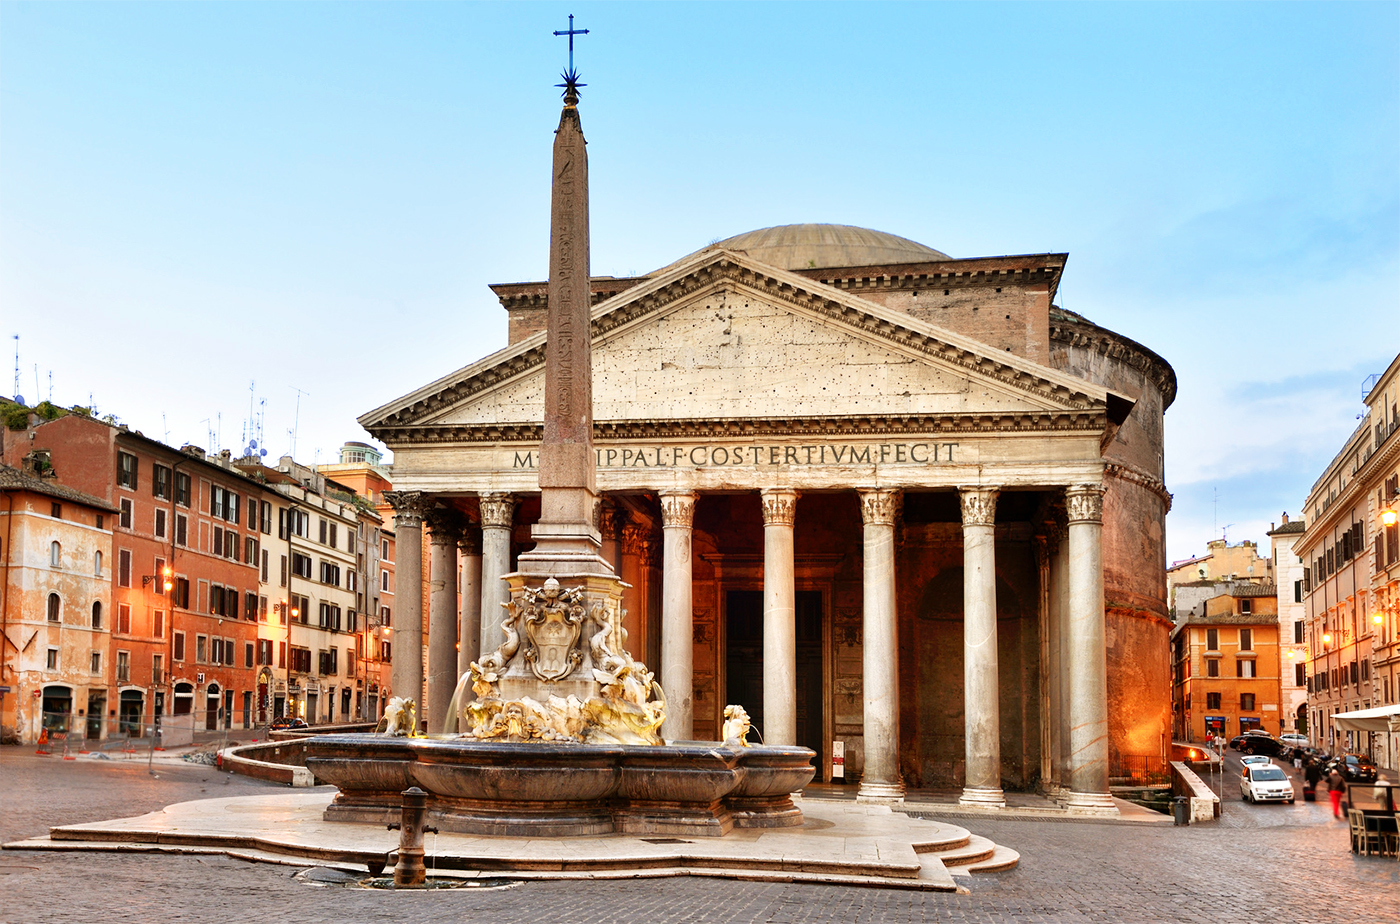 The Pantheon is one of the passing points for the Jubilee of Mercy announced by Pope Francis